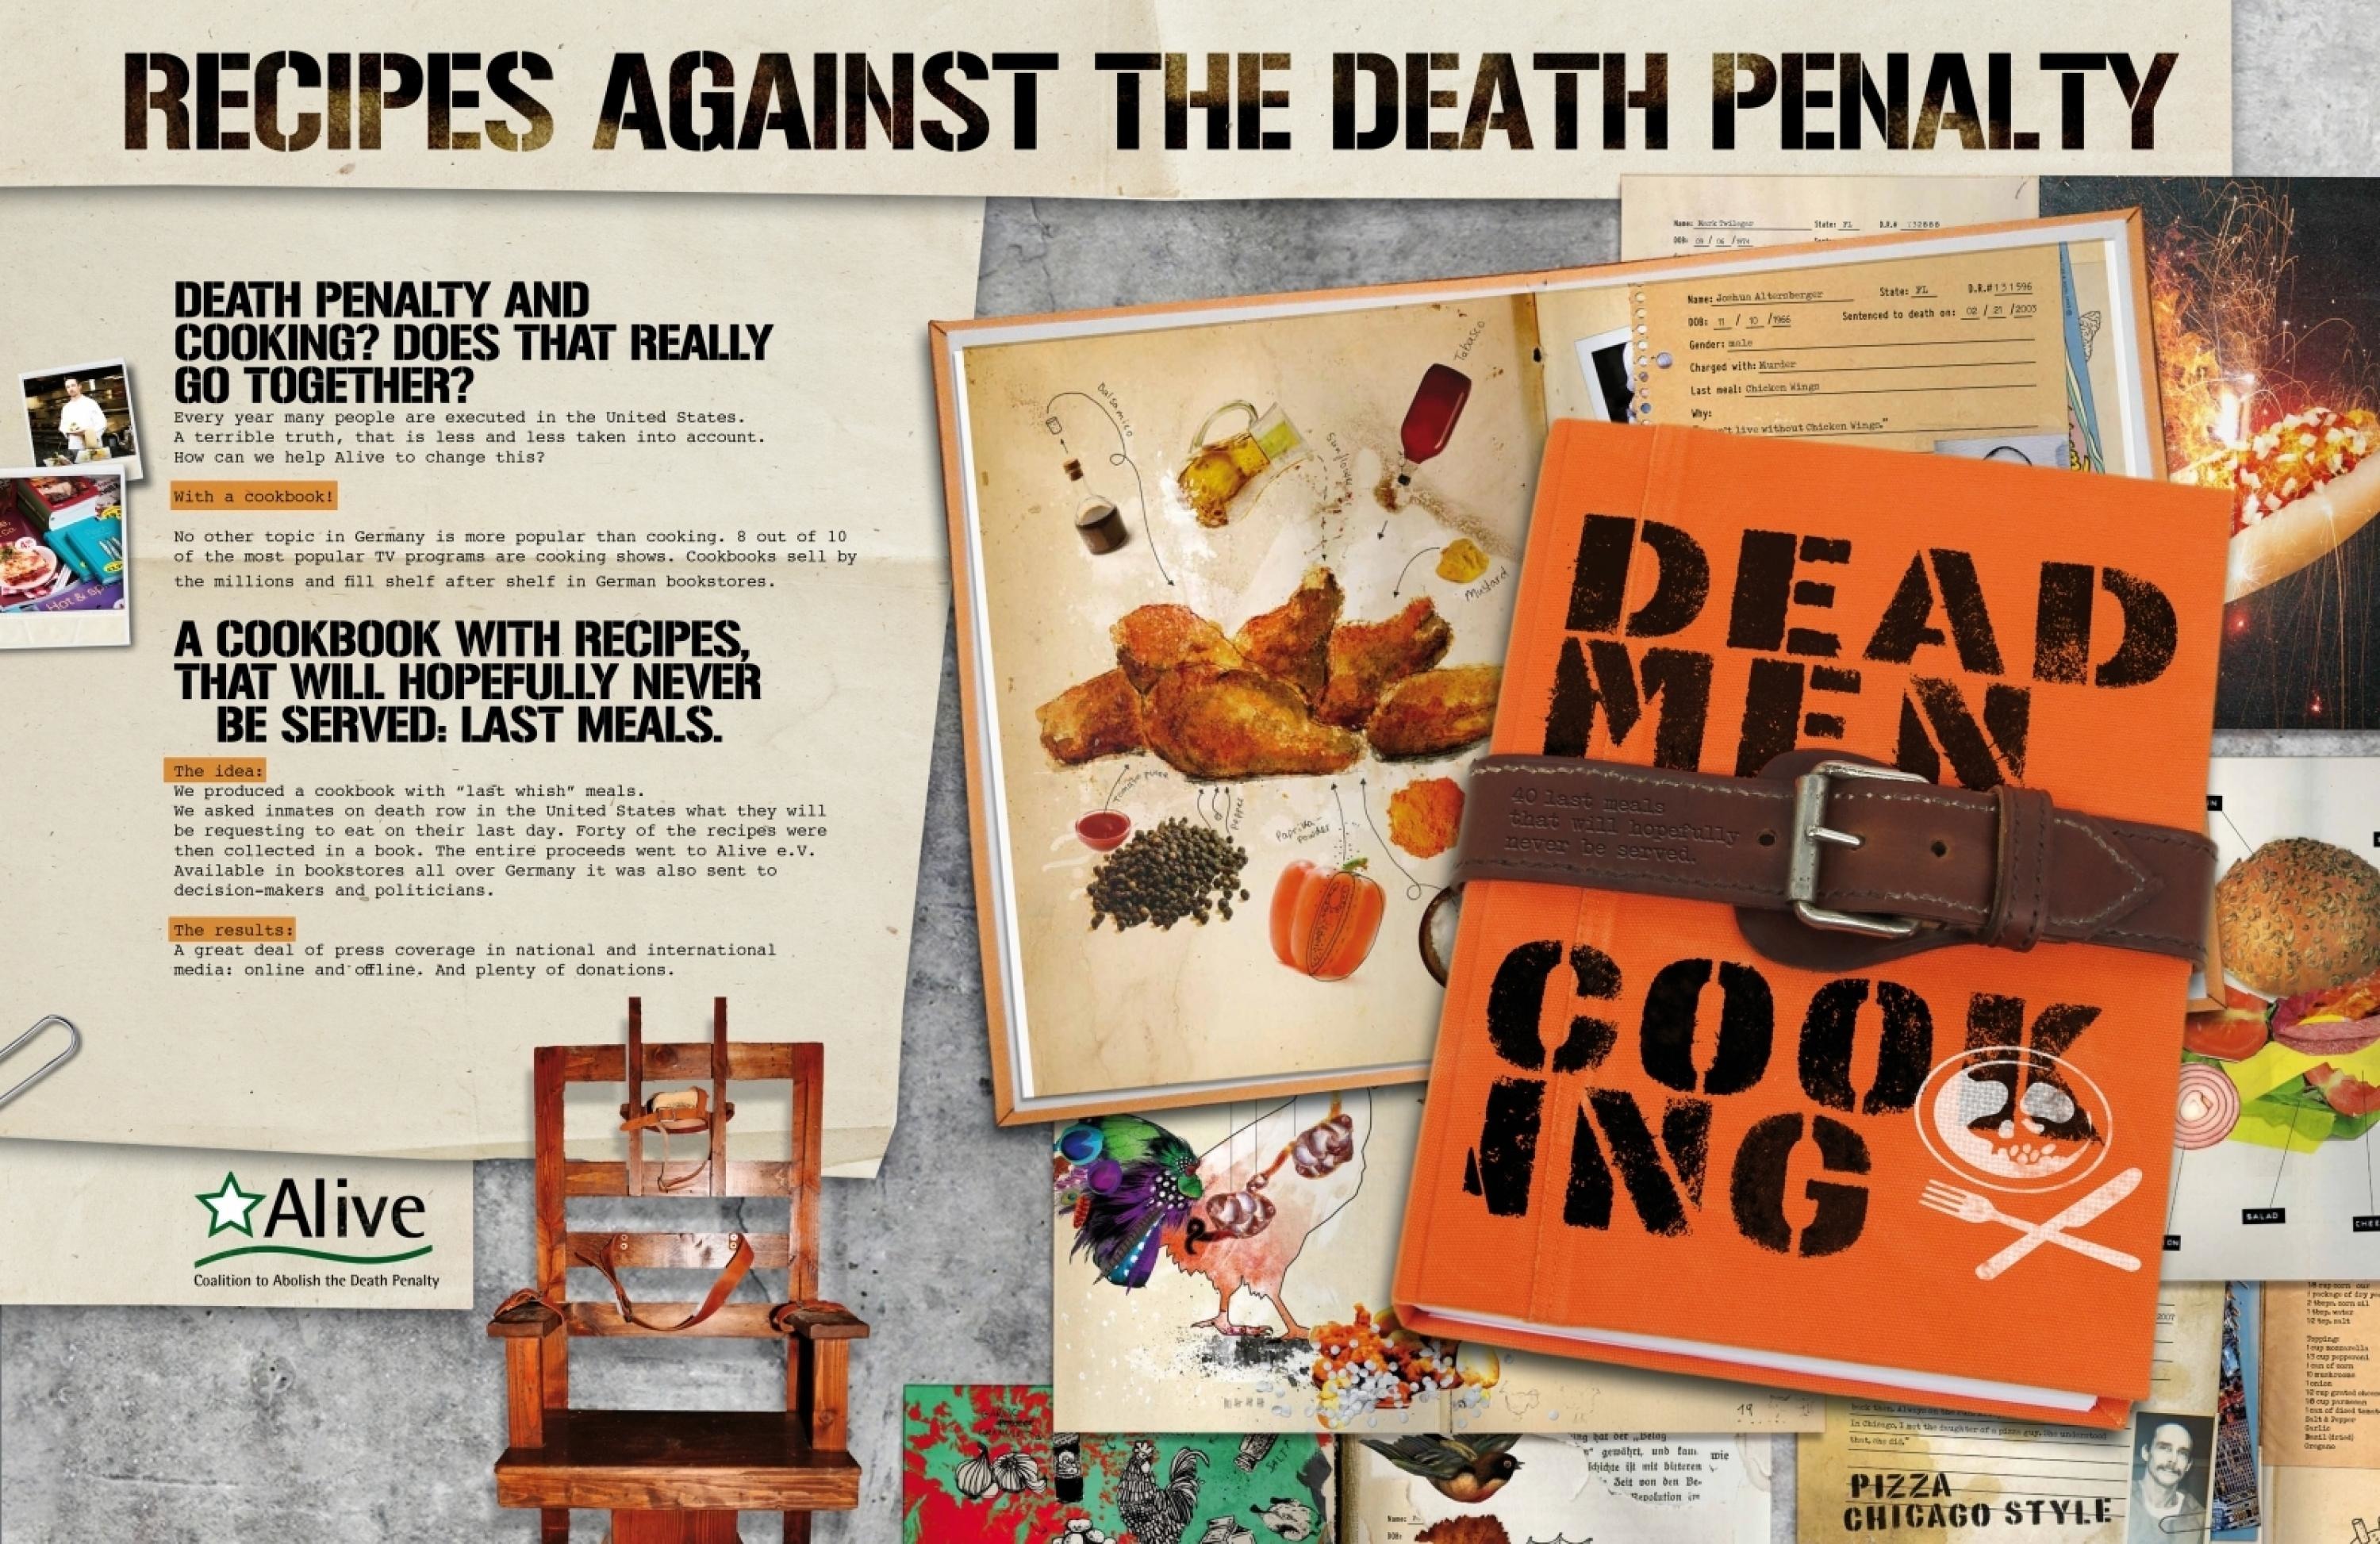 COALITION TO ABOLISH THE DEATH PENALTY